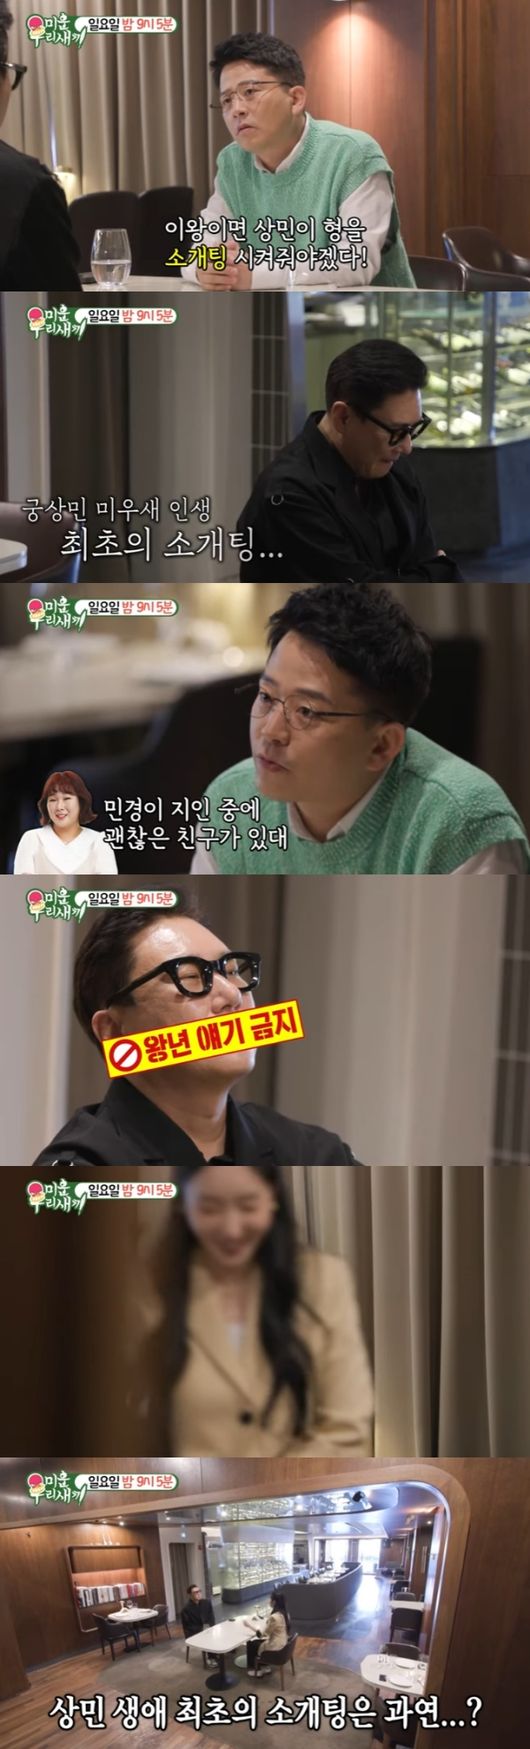 My Little Old Boy Lee Sang-min challenges blind dateOn the 26th, SBS My Little Old Boy uploaded the premiere video before the broadcast.On this day, Lee Sang-min appeared in a restaurant with a reminiscent expression and attracted attention. He said to Kim Jun-ho, Why?Kim Jun-ho said, Please understand my efforts anyway.It was a joke that I was always kidding, but I thought I should blind date Sangmin Lee if I was sorry. Seo Jang-hoon, who watched this, was delighted with Lee Sang-mins blind date news, saying, The debt is over now. Kim Jun-ho said, I do not have anyone around.Kim Min-kyung said, I have a good friend among my acquaintances. I try to have a conversation through such a meeting. When is your last blind date?Lee Sang-min said, Ive never done a blind date, and Kim Jun-ho said, Have you ever been to a divorce?Lee Sang-min said, Do not do that. I will take care of it. Do not worry, Lee Sang-min said.I wrote Roora professional and amateur and love law lyrics. I have all the skills of love. Kim Jun-ho said, Do not do a story-telling. Roora a story-telling. Lee Sang-min said, Because you are.I wrote nearly 100 lyrics. All the themes are love. But when asked, When is that? I answered until 1999 and laughed.Kim Jun-ho said, Its 2023 now, and Lee Sang-min said, I feel better about love and interpretation than you. Kim Jun-ho said, A story-telling was good.Roora a story-telling Never do a story-telling, MC Hammer a story-telling in the old days. Cheongdam-dong lived a story-telling. I know your repertoire.Dont do that story-telling thing.In the end, Lee Sang-min said, Okay, and I want to see my heart as it is. I do not know. Its frustrating. Kim Jun-ho said, I do not know what it is.Its a shame, he said. Its time to start your love because you pay off your debt this year.Then the time for the blind date opponent to arrive came, and Lee Sang-min sent Kim Jun-ho out, saying, Go away. I think its better without you. Kim Jun-ho said, Good luck.Kim Min-kyung said, Do not let Kim Min-kyung get rid of it. Lee Sang-min! And soon after, a woman who decided to have a blind date appeared.Meanwhile, SBS My Little Old Boy is broadcast every Sunday at 9:05 pm.SBS